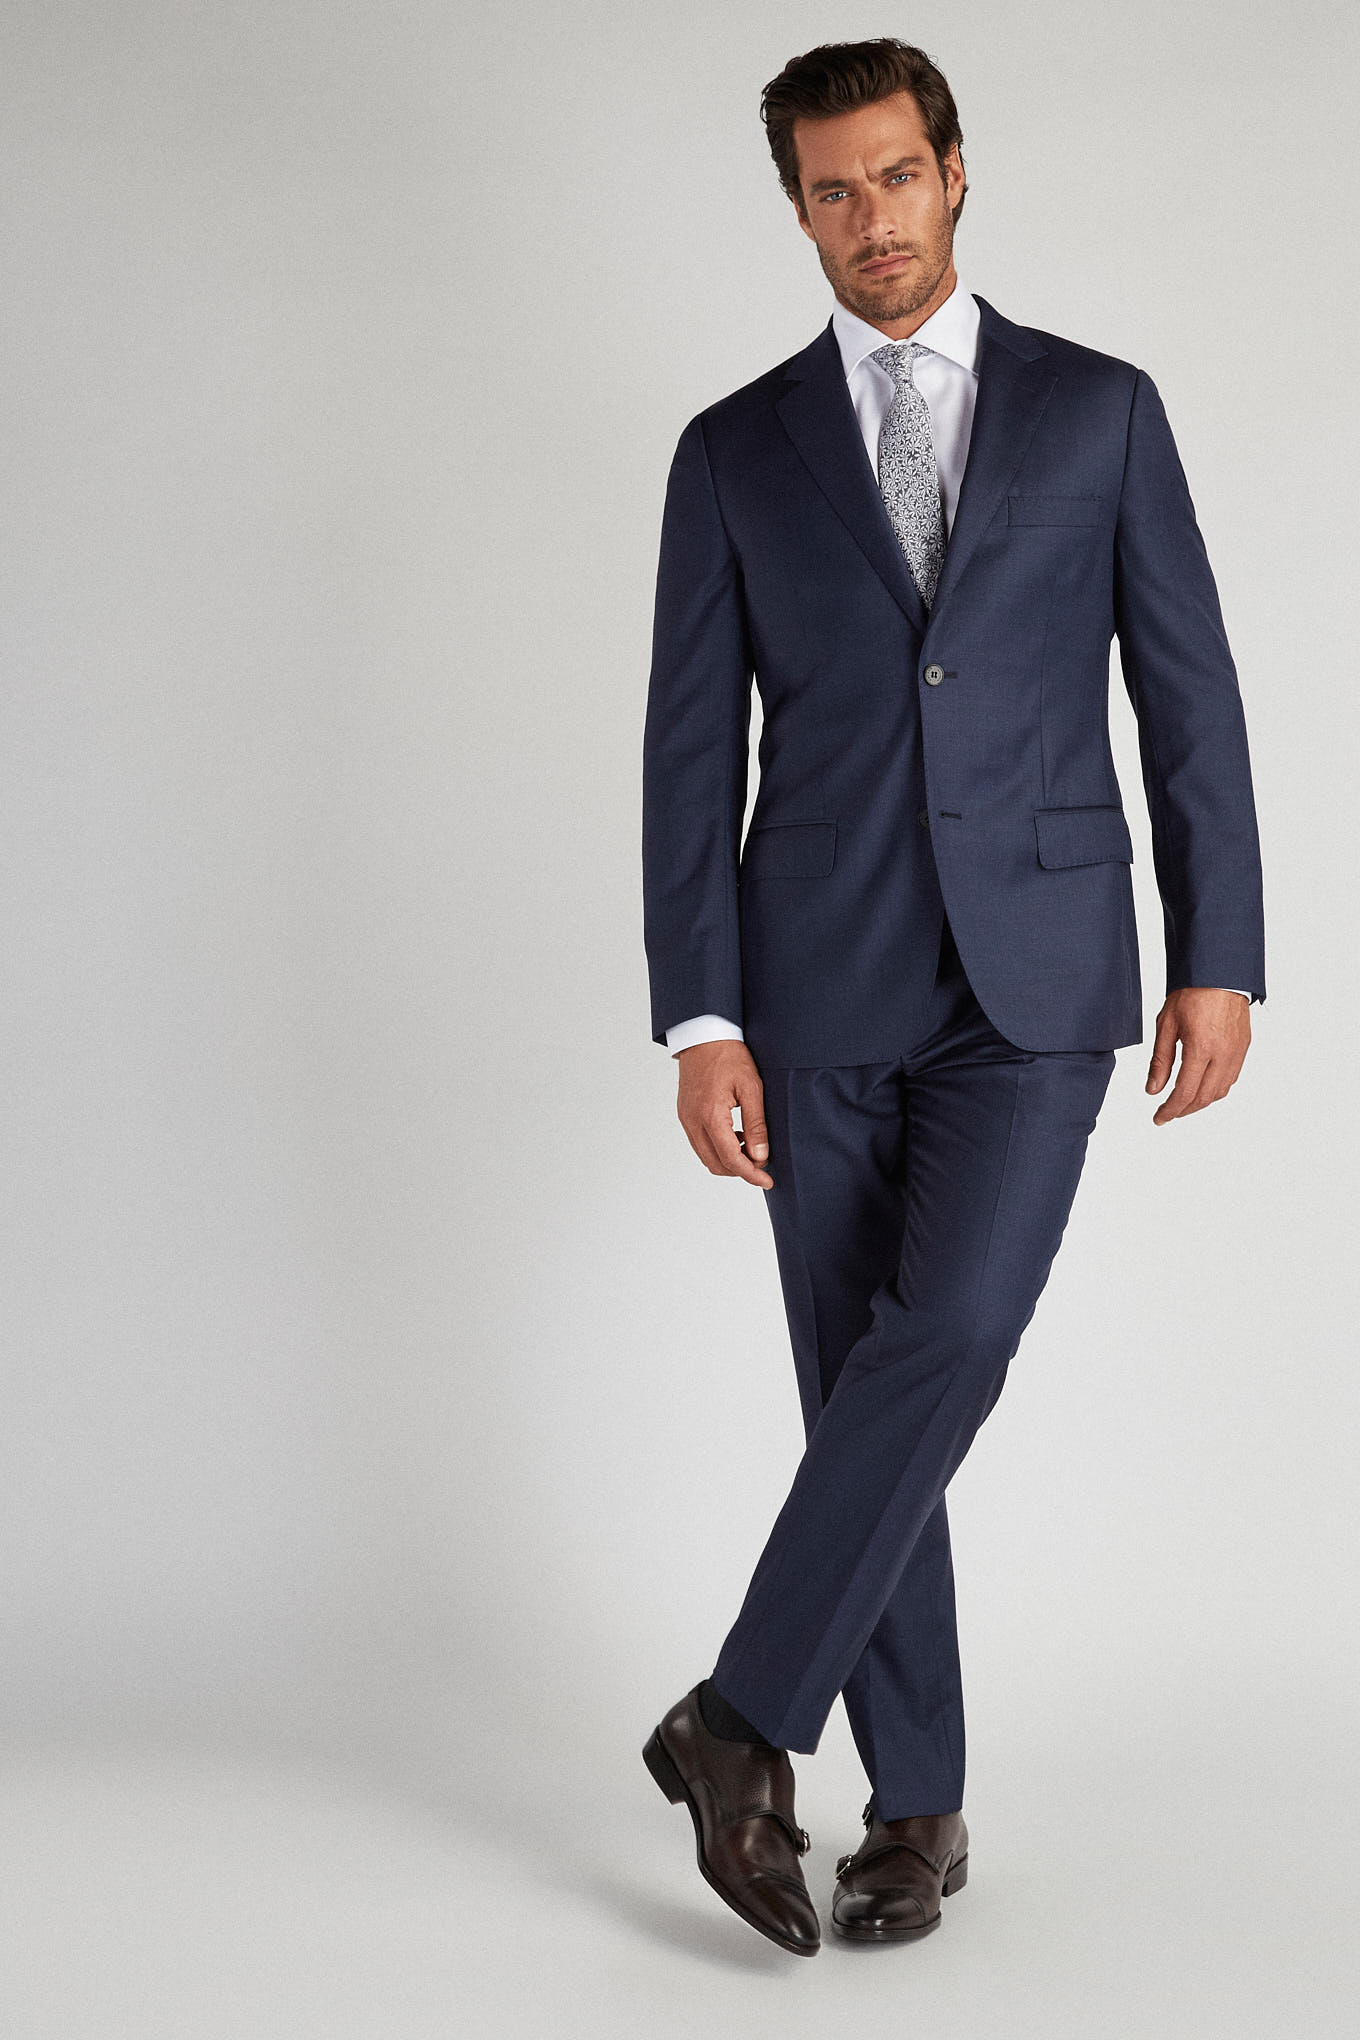 MALE MODELS IN SUITS: Gonçalo Teixeira for SACOOR